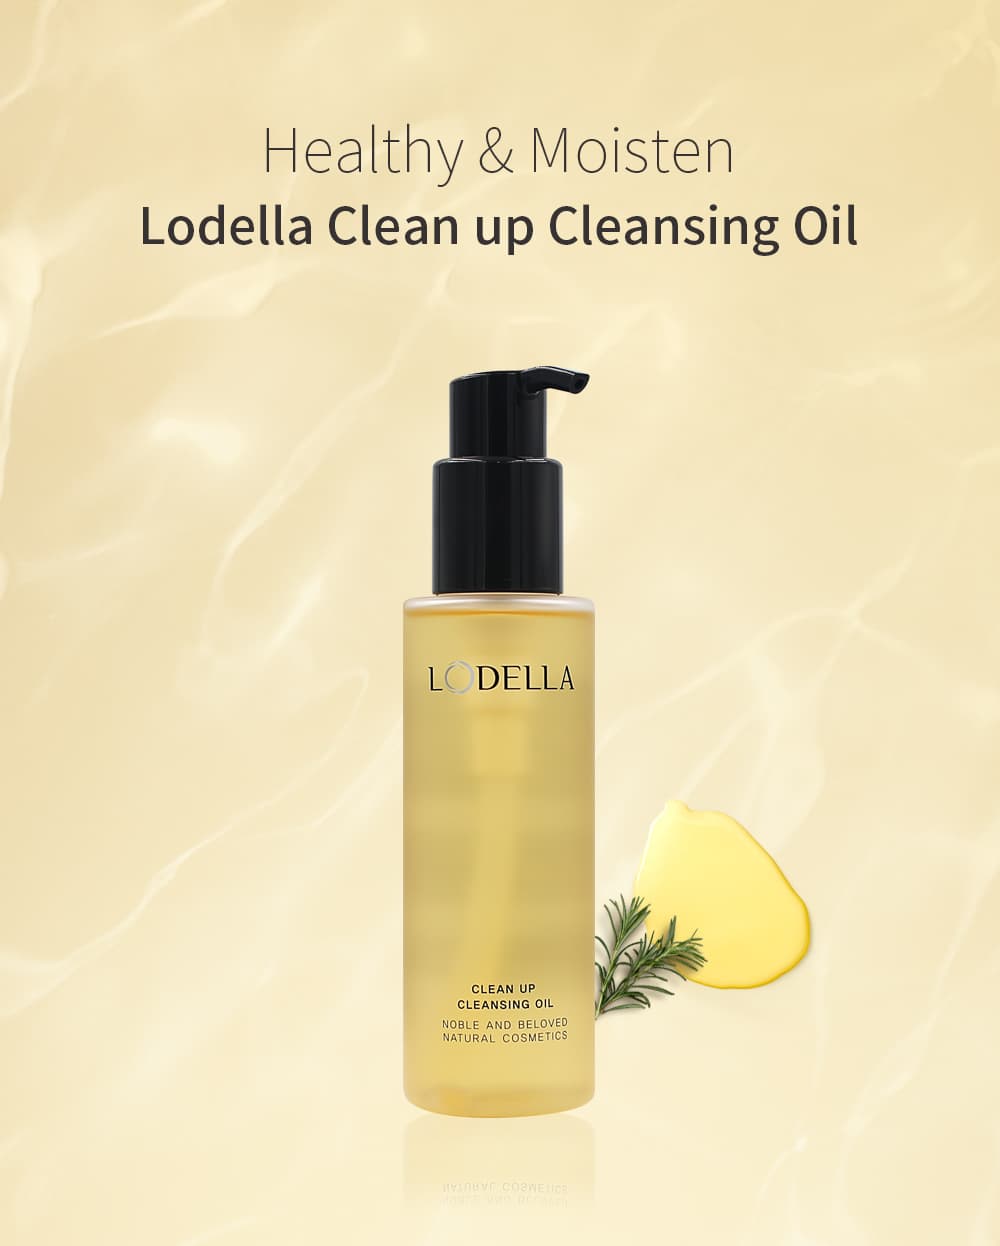 Lodella Cleanup Cleansing Oil